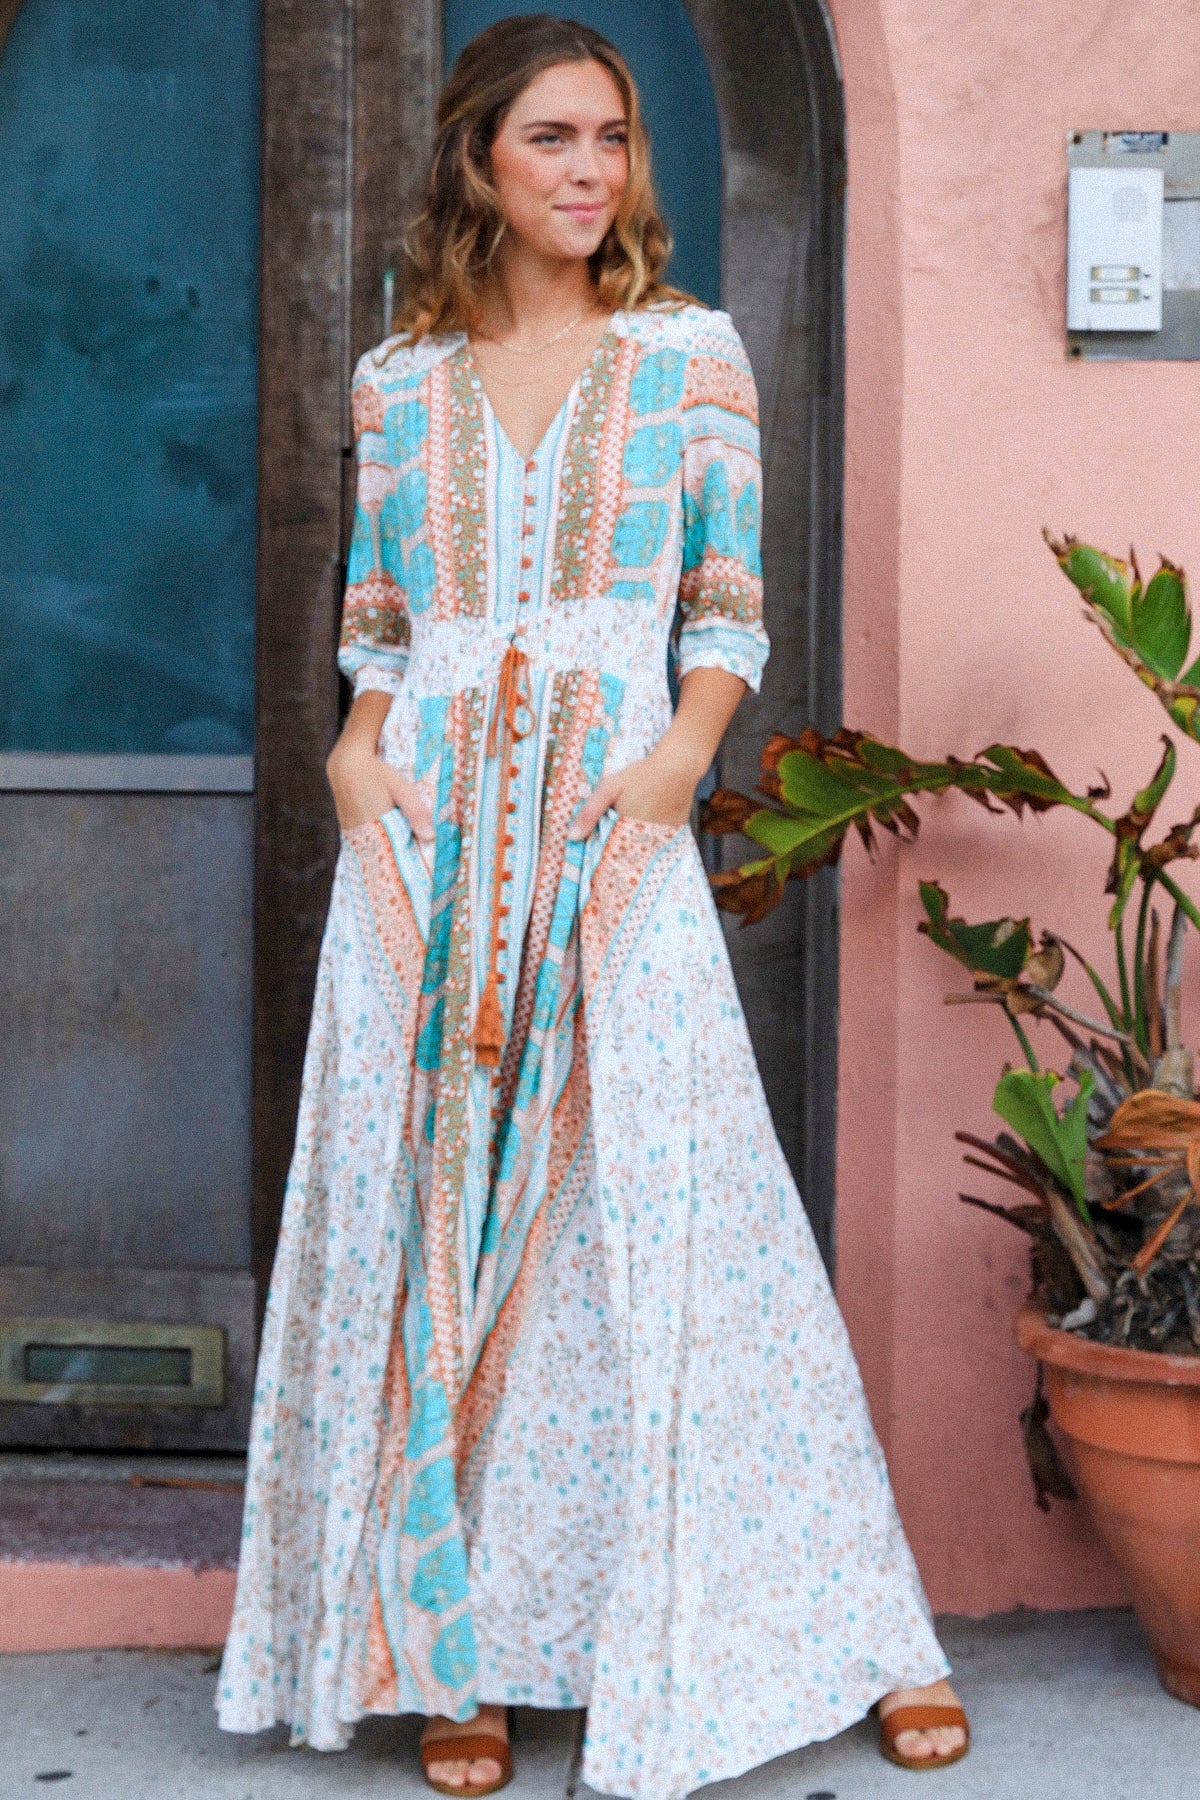 Bailey Maxi Boho Dress: 
Last years bestseller is BACK. The Bailey Dress sold out time and time again and who can blame it?
The Bailey Maxi Dress has a mix of soft blues and browns in a gor - Ciao Bella Dresses 